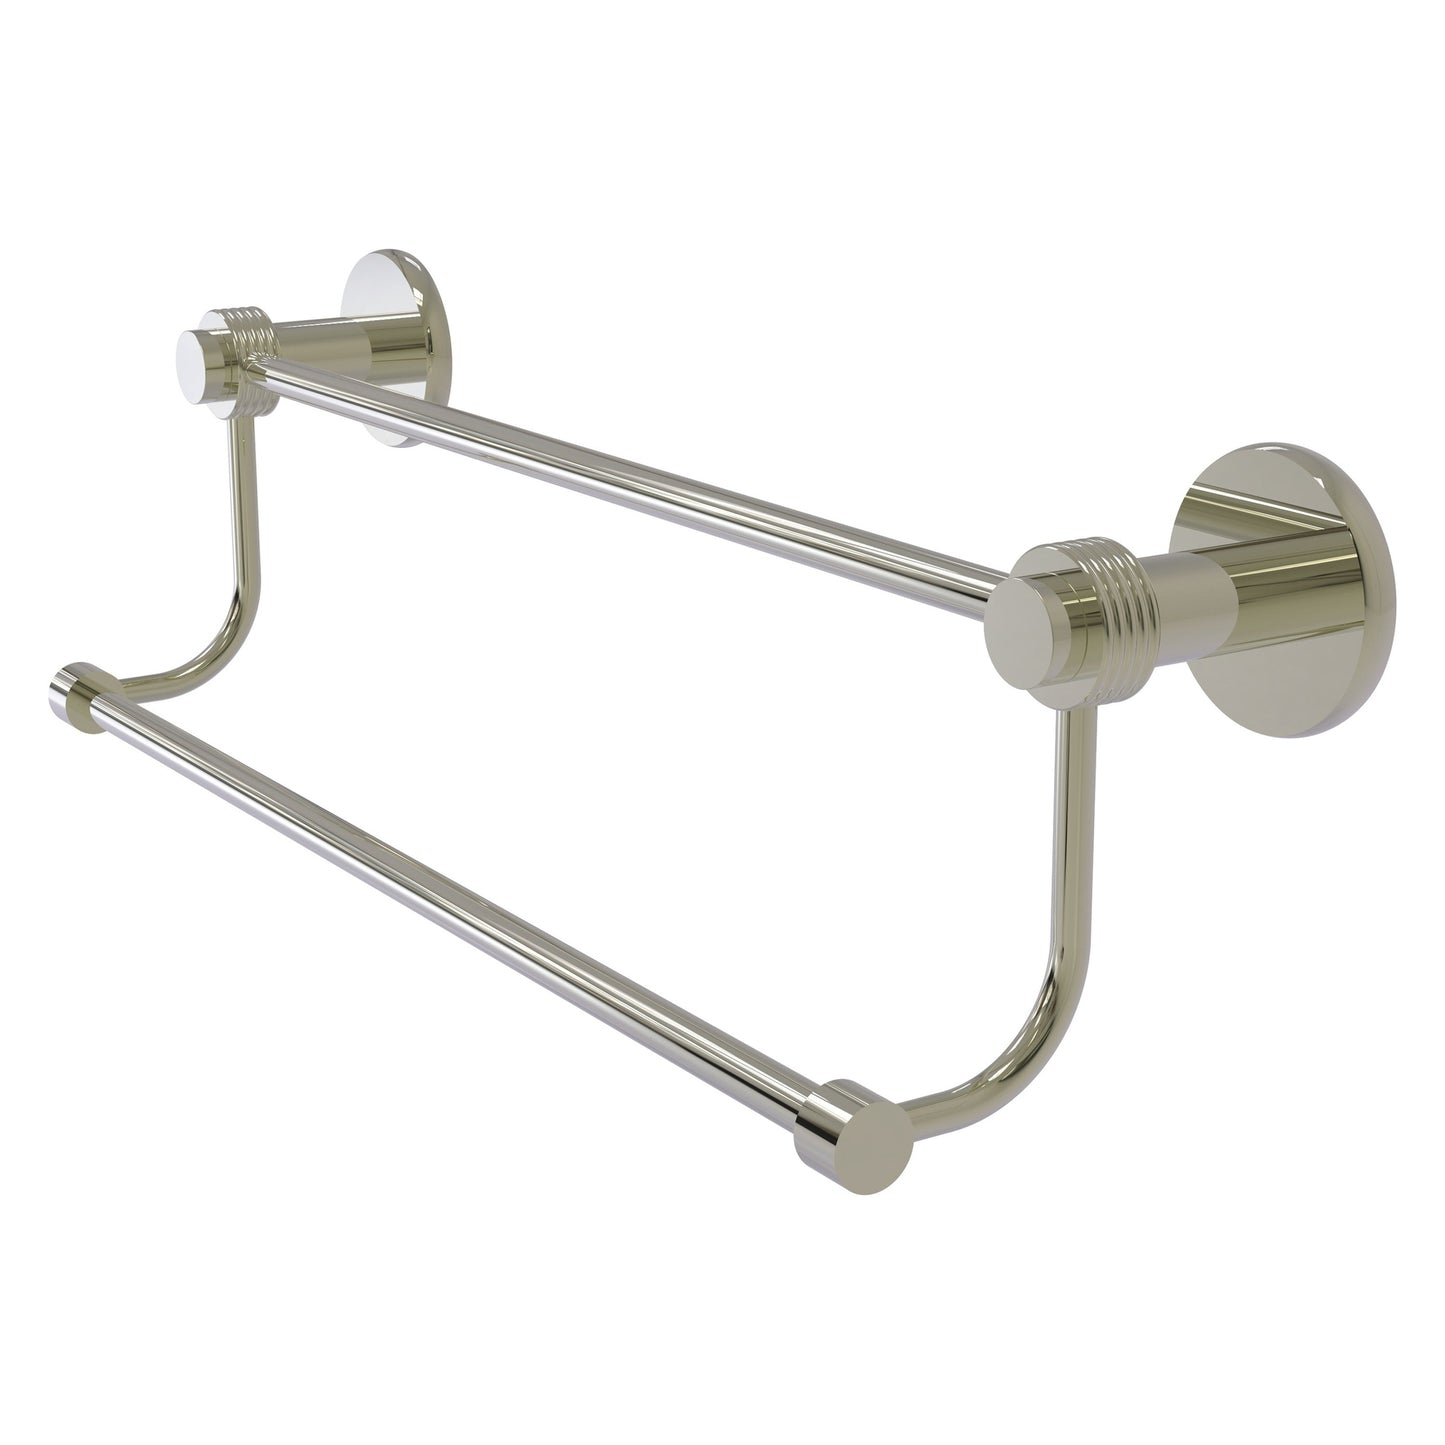 Allied Brass Mercury 18" x 20.5" Polished Nickel Solid Brass Double Towel Bar With Grooved Accents